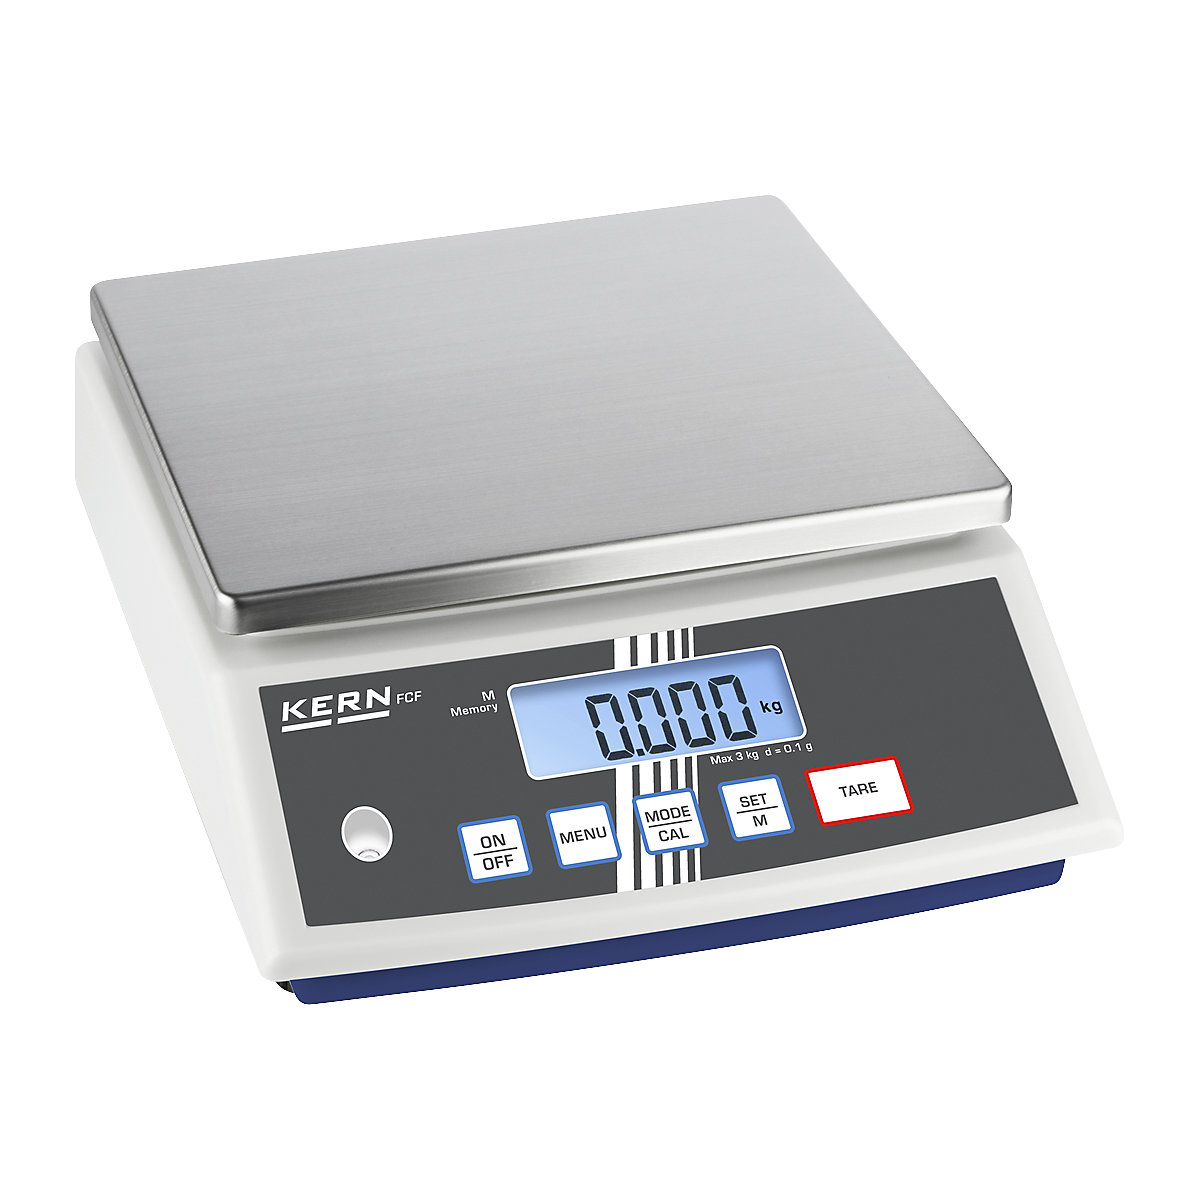 Tabletop scales – KERN, high accuracy, weighing range 30000 g, read-out accuracy 1 g-1